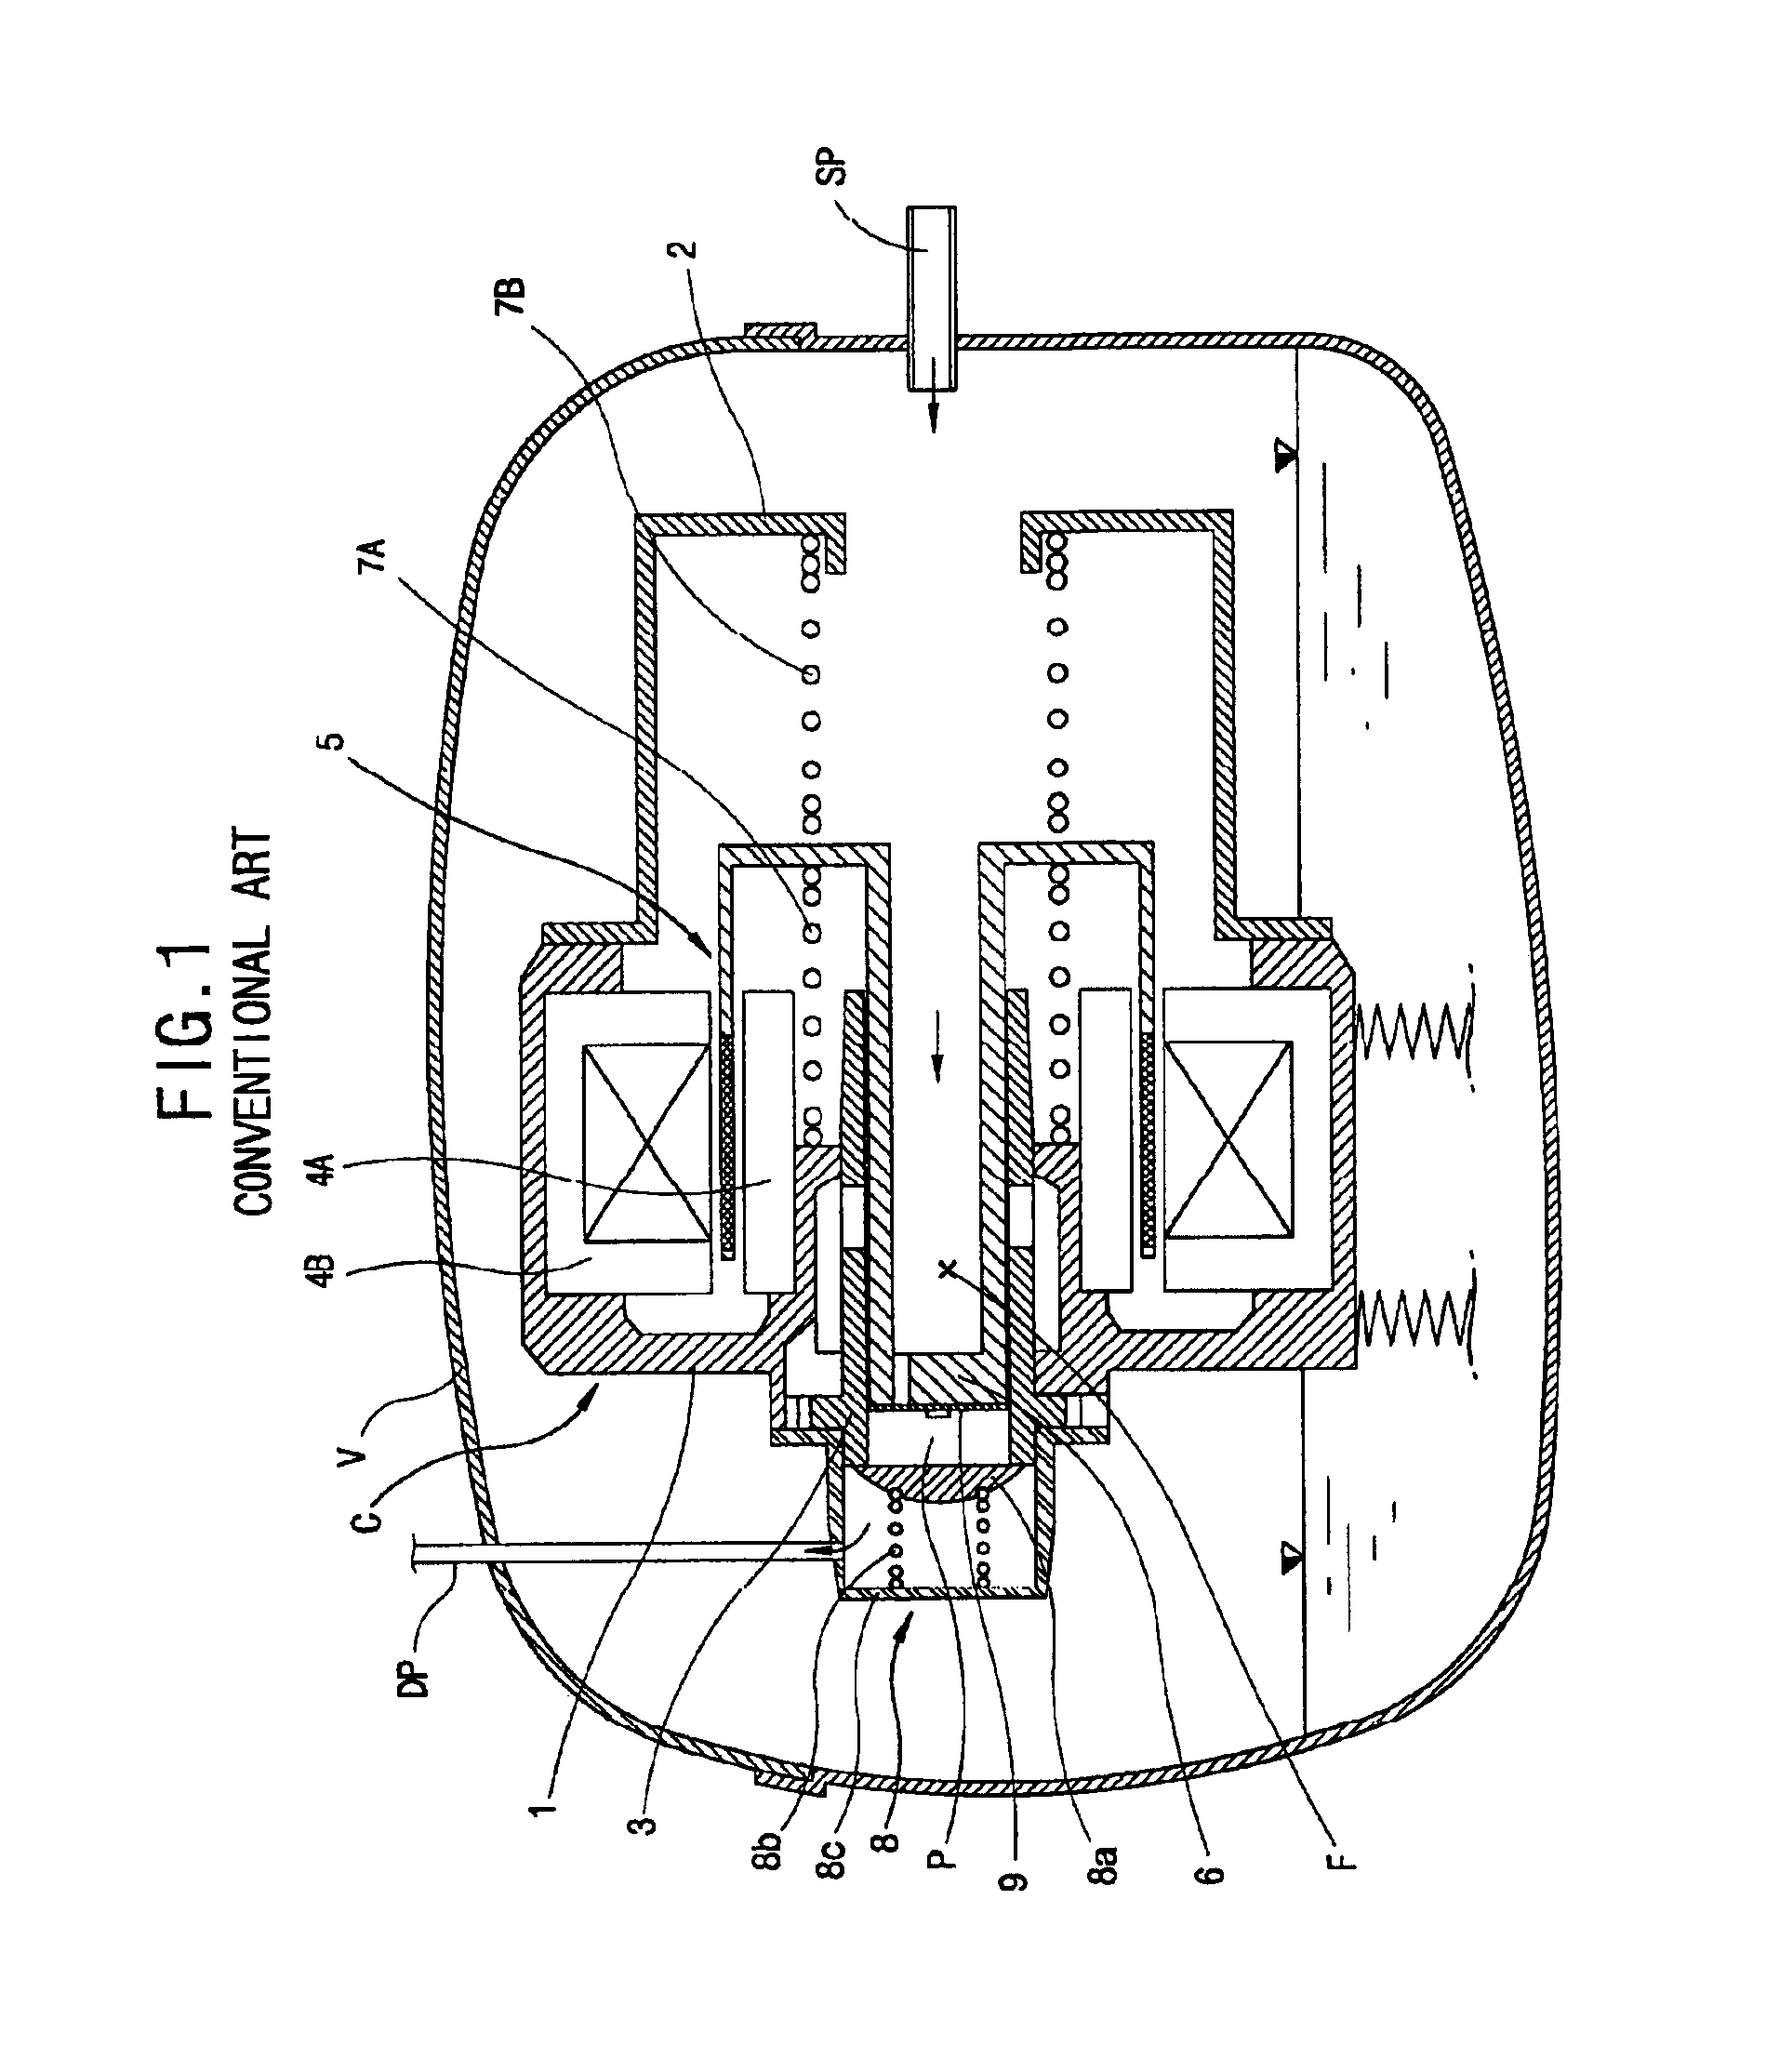 Suction valve coupling structure for reciprocating compressor